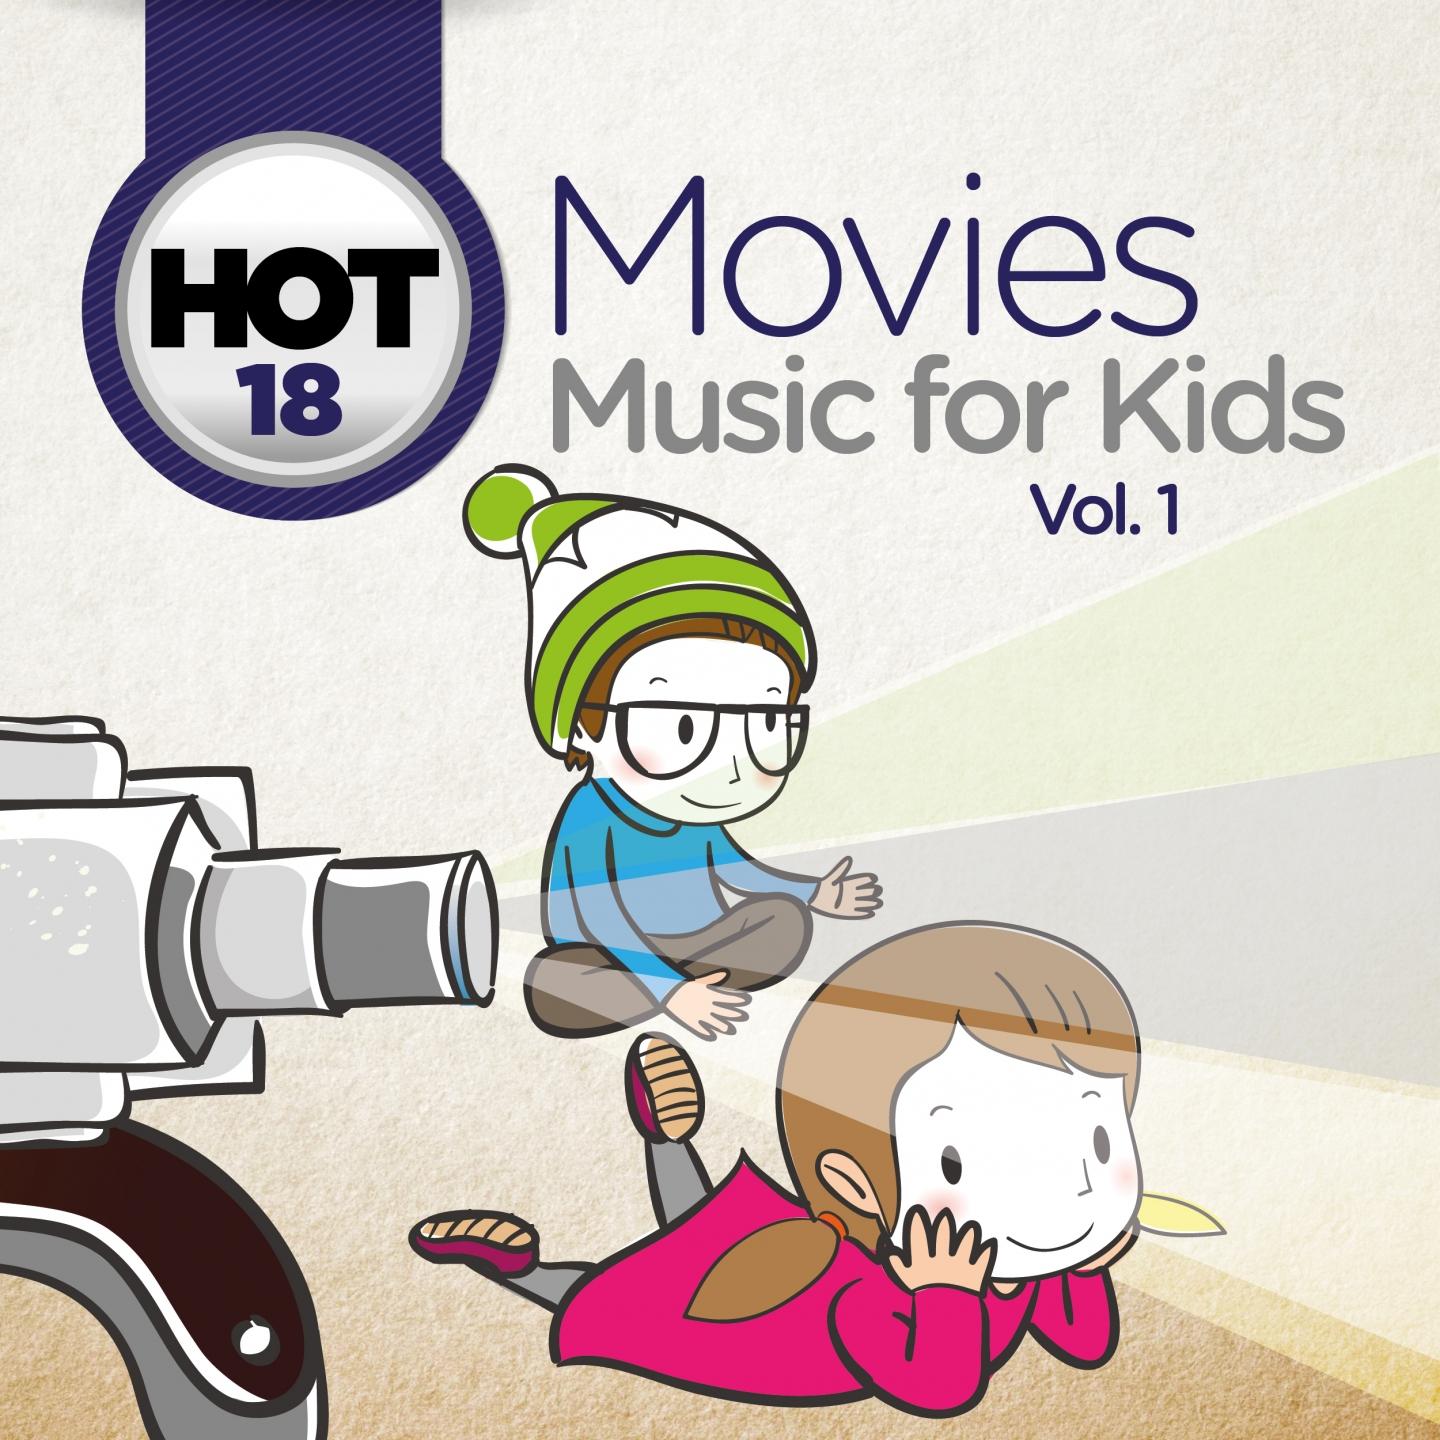 Hot 18 Movies Music for Kids, Vol. 1